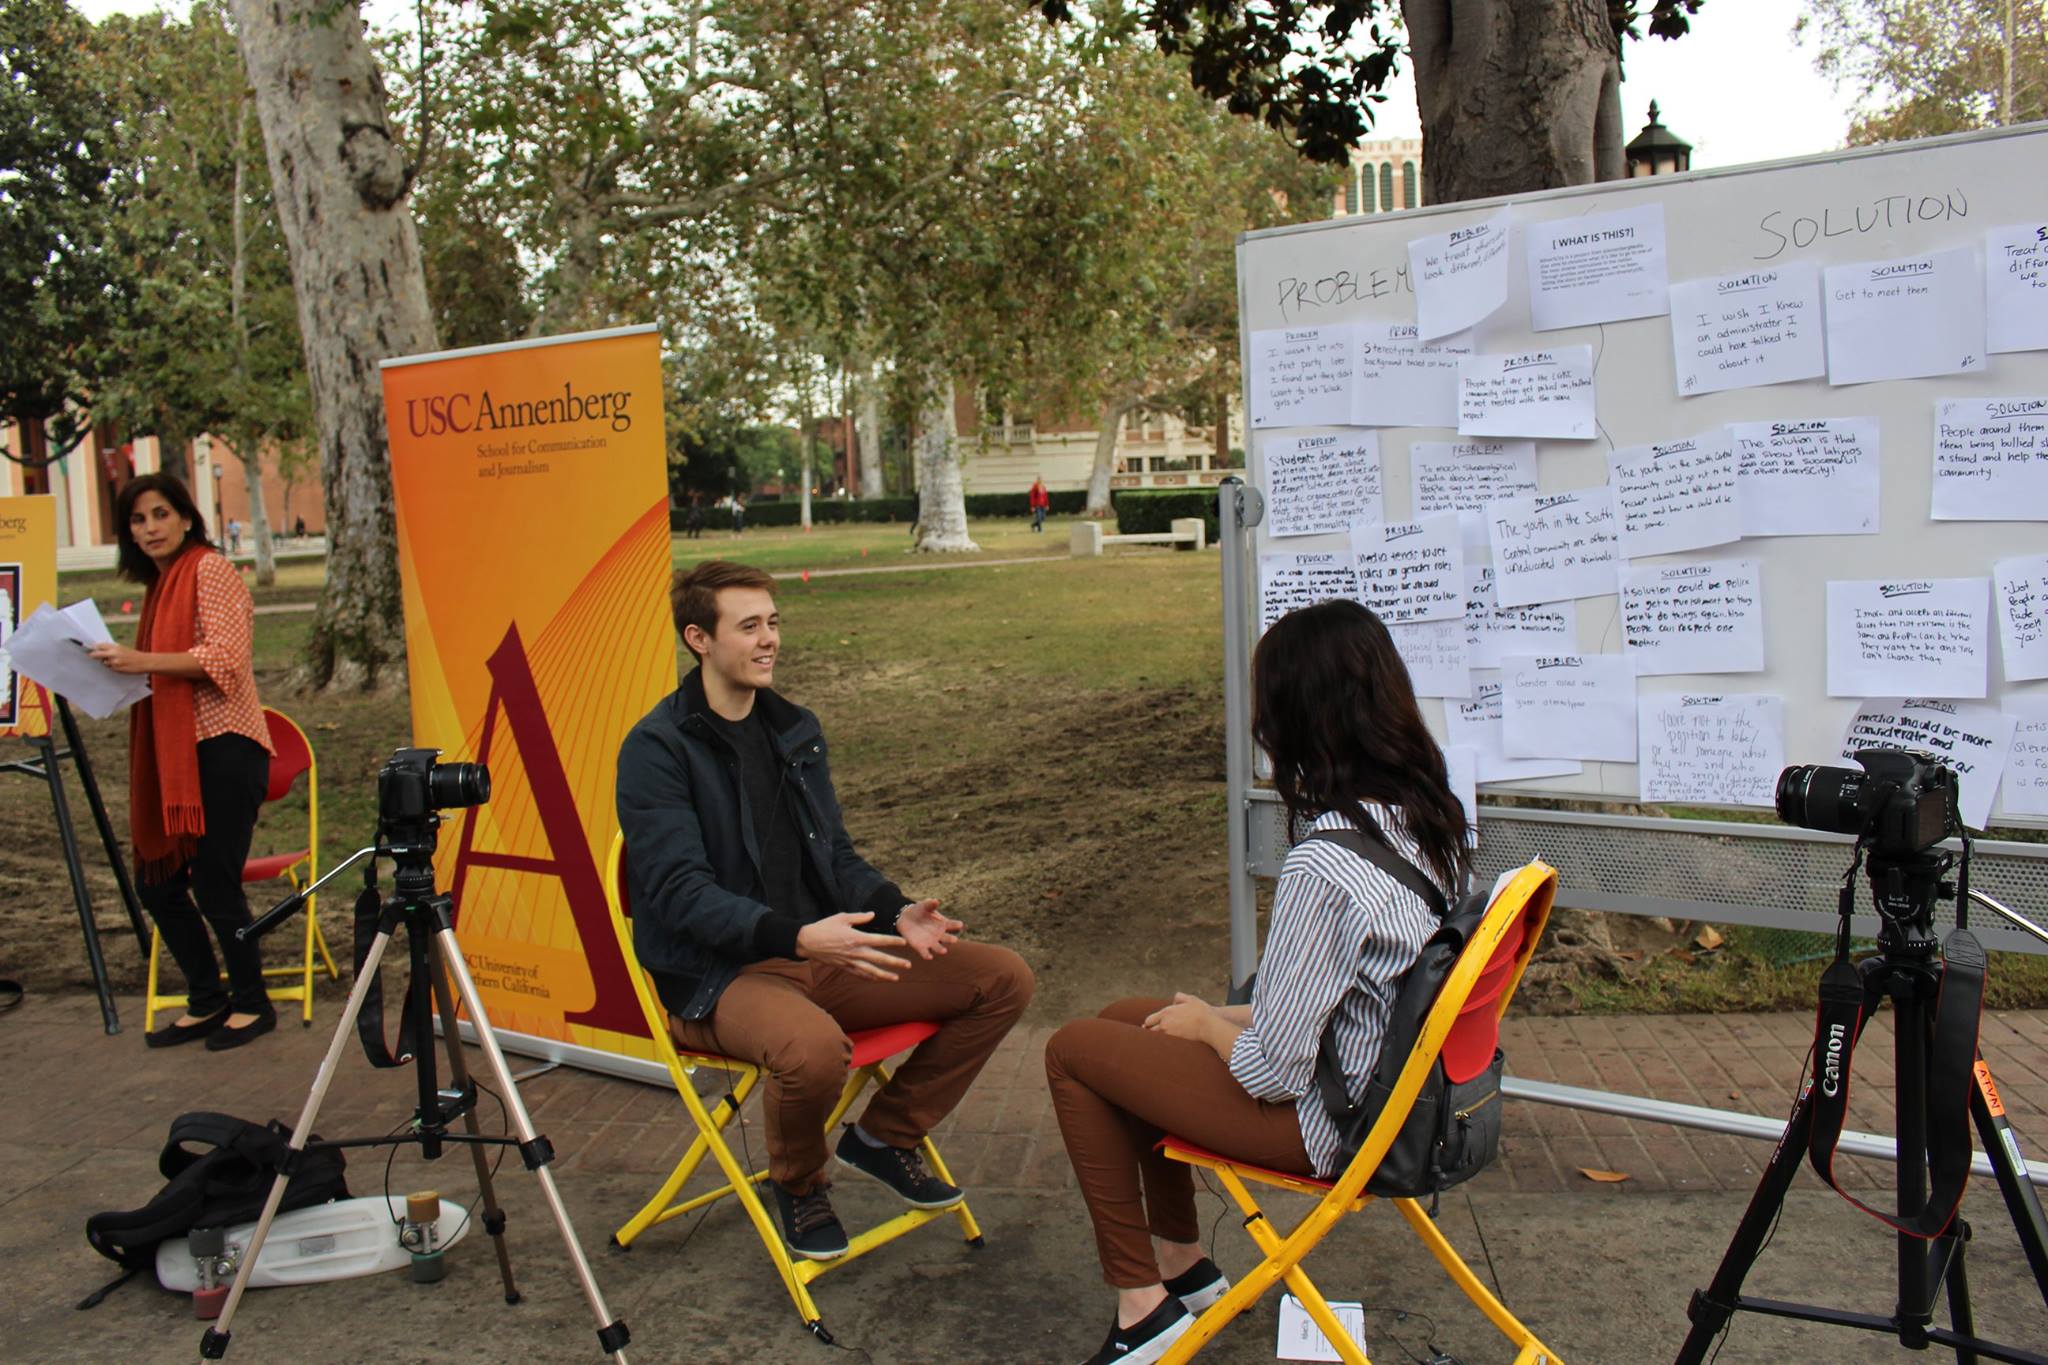 USC Annenberg and #diverSCity bring conversation about diversity to